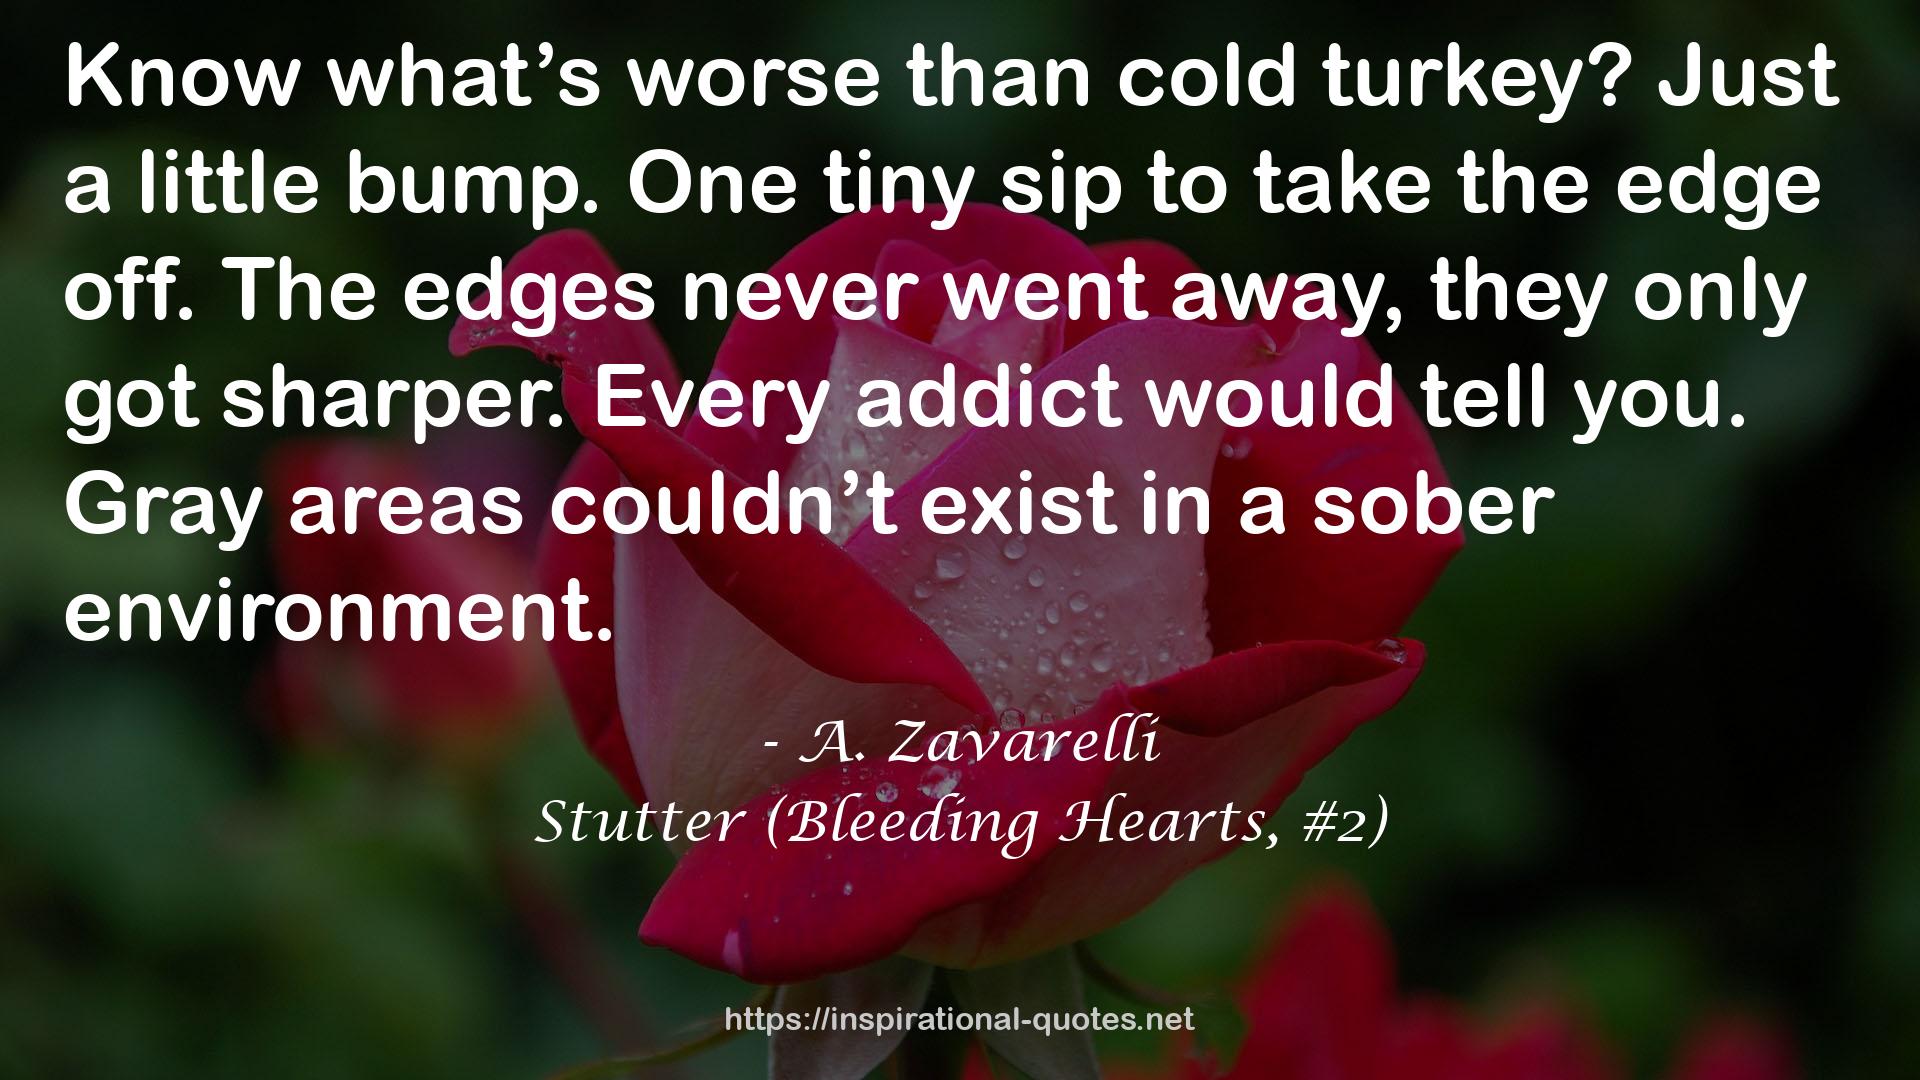 One tiny sip  QUOTES